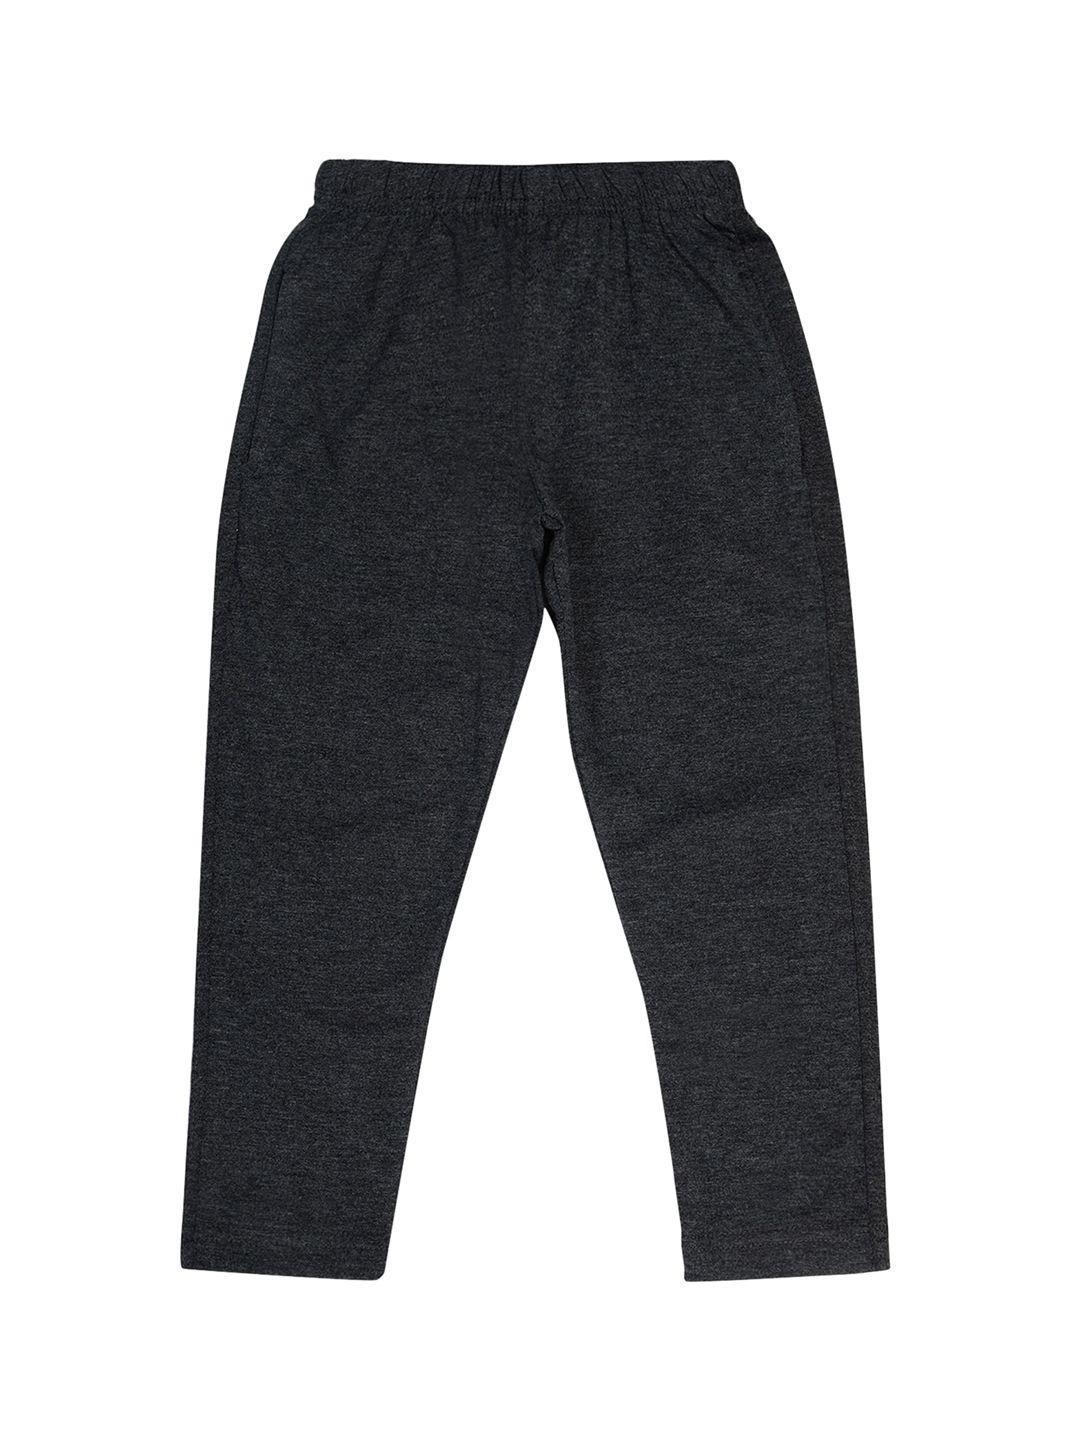 dyca boys charcoal solid cotton track pants